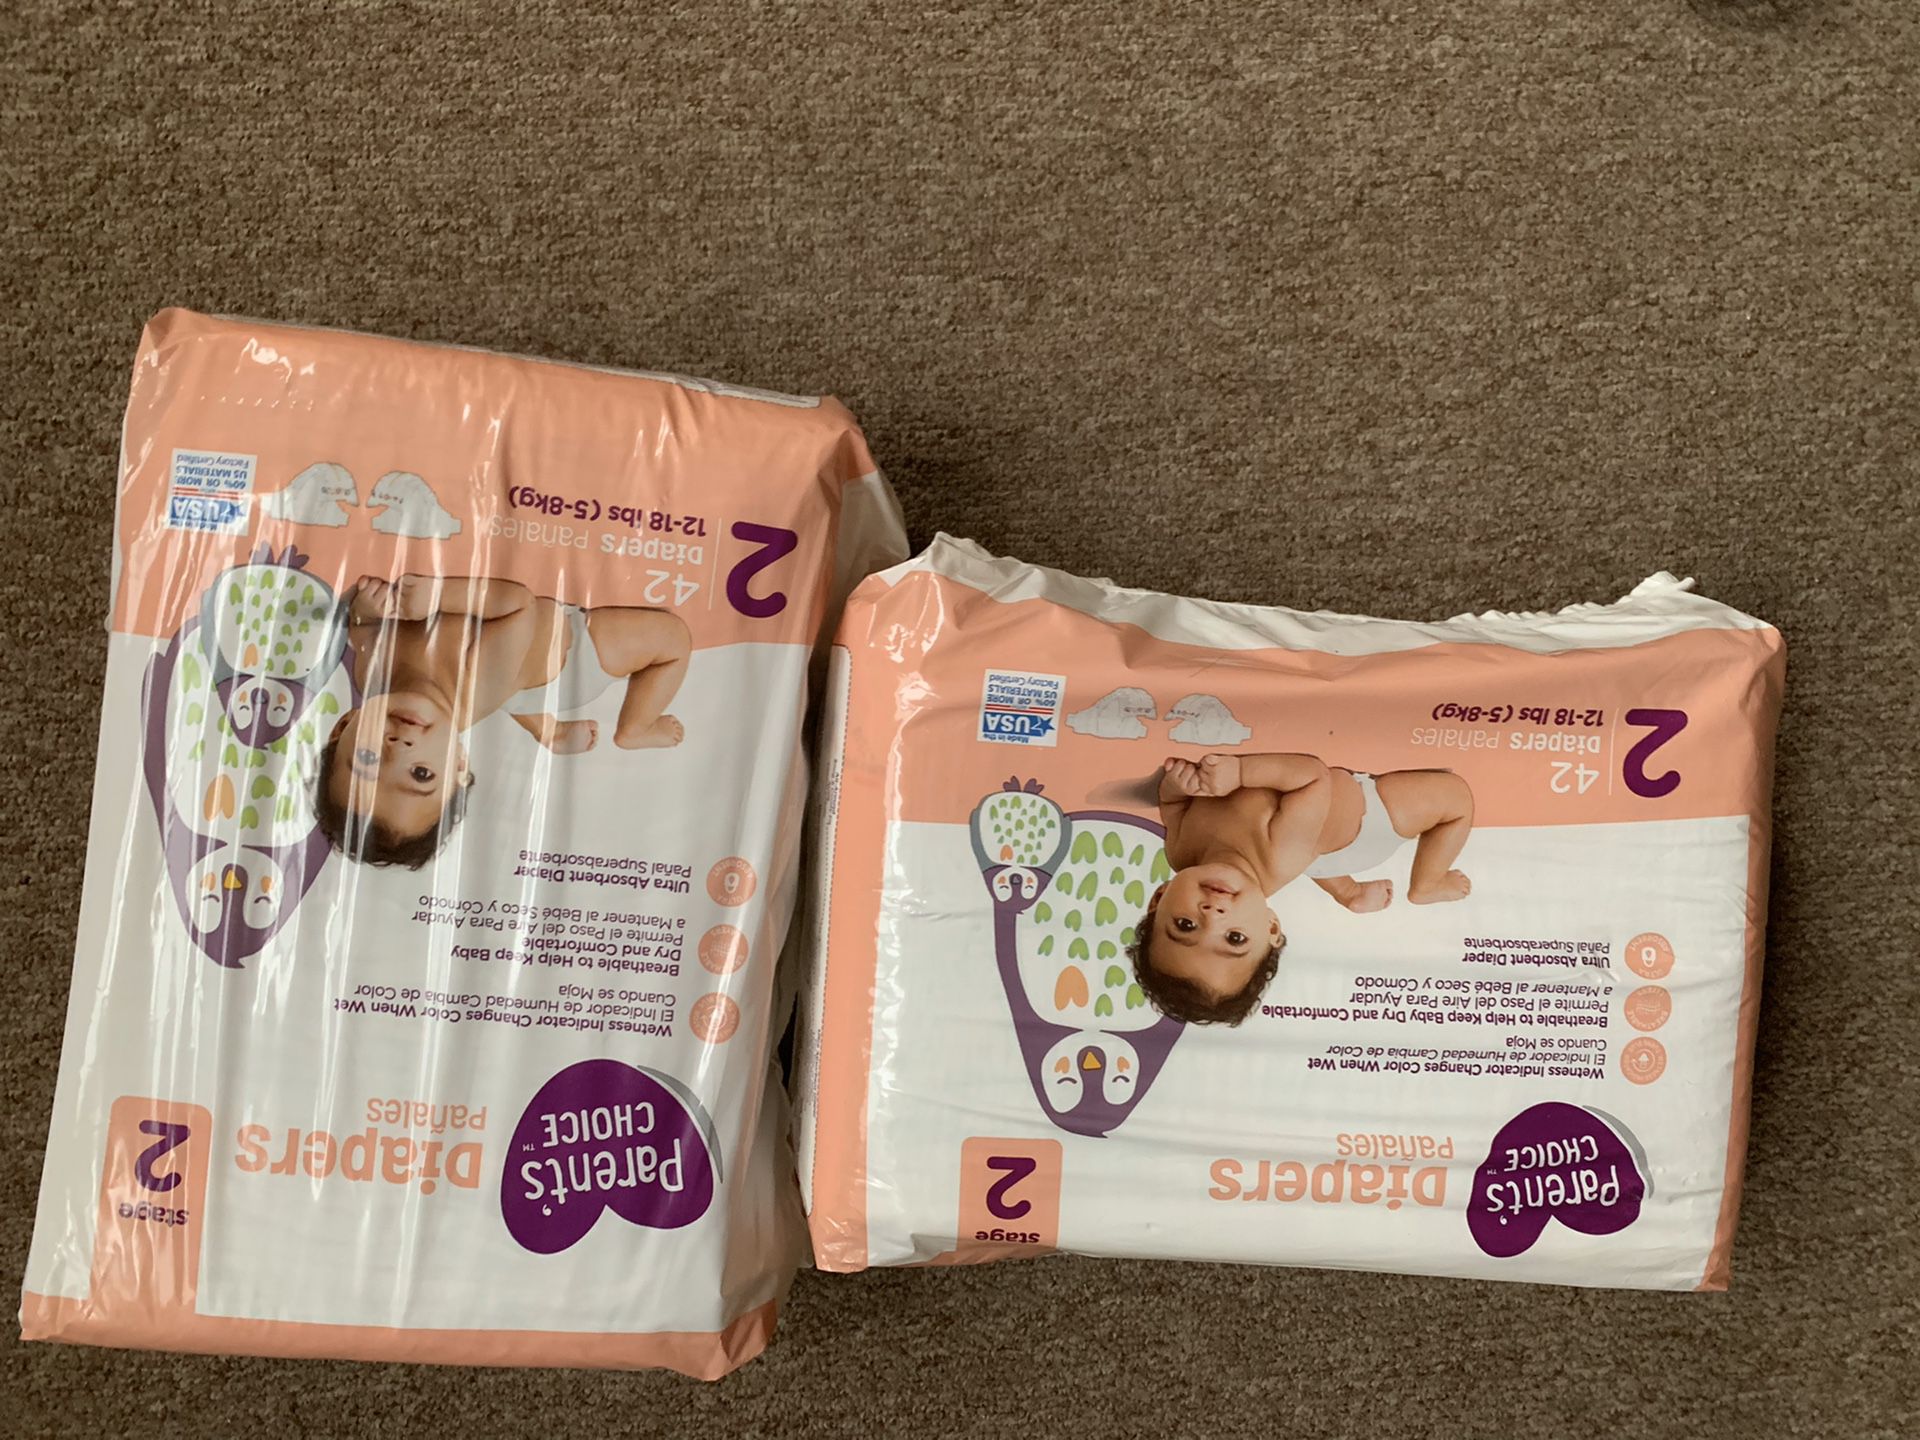 2 packs of Size 2 diapers (84 count)